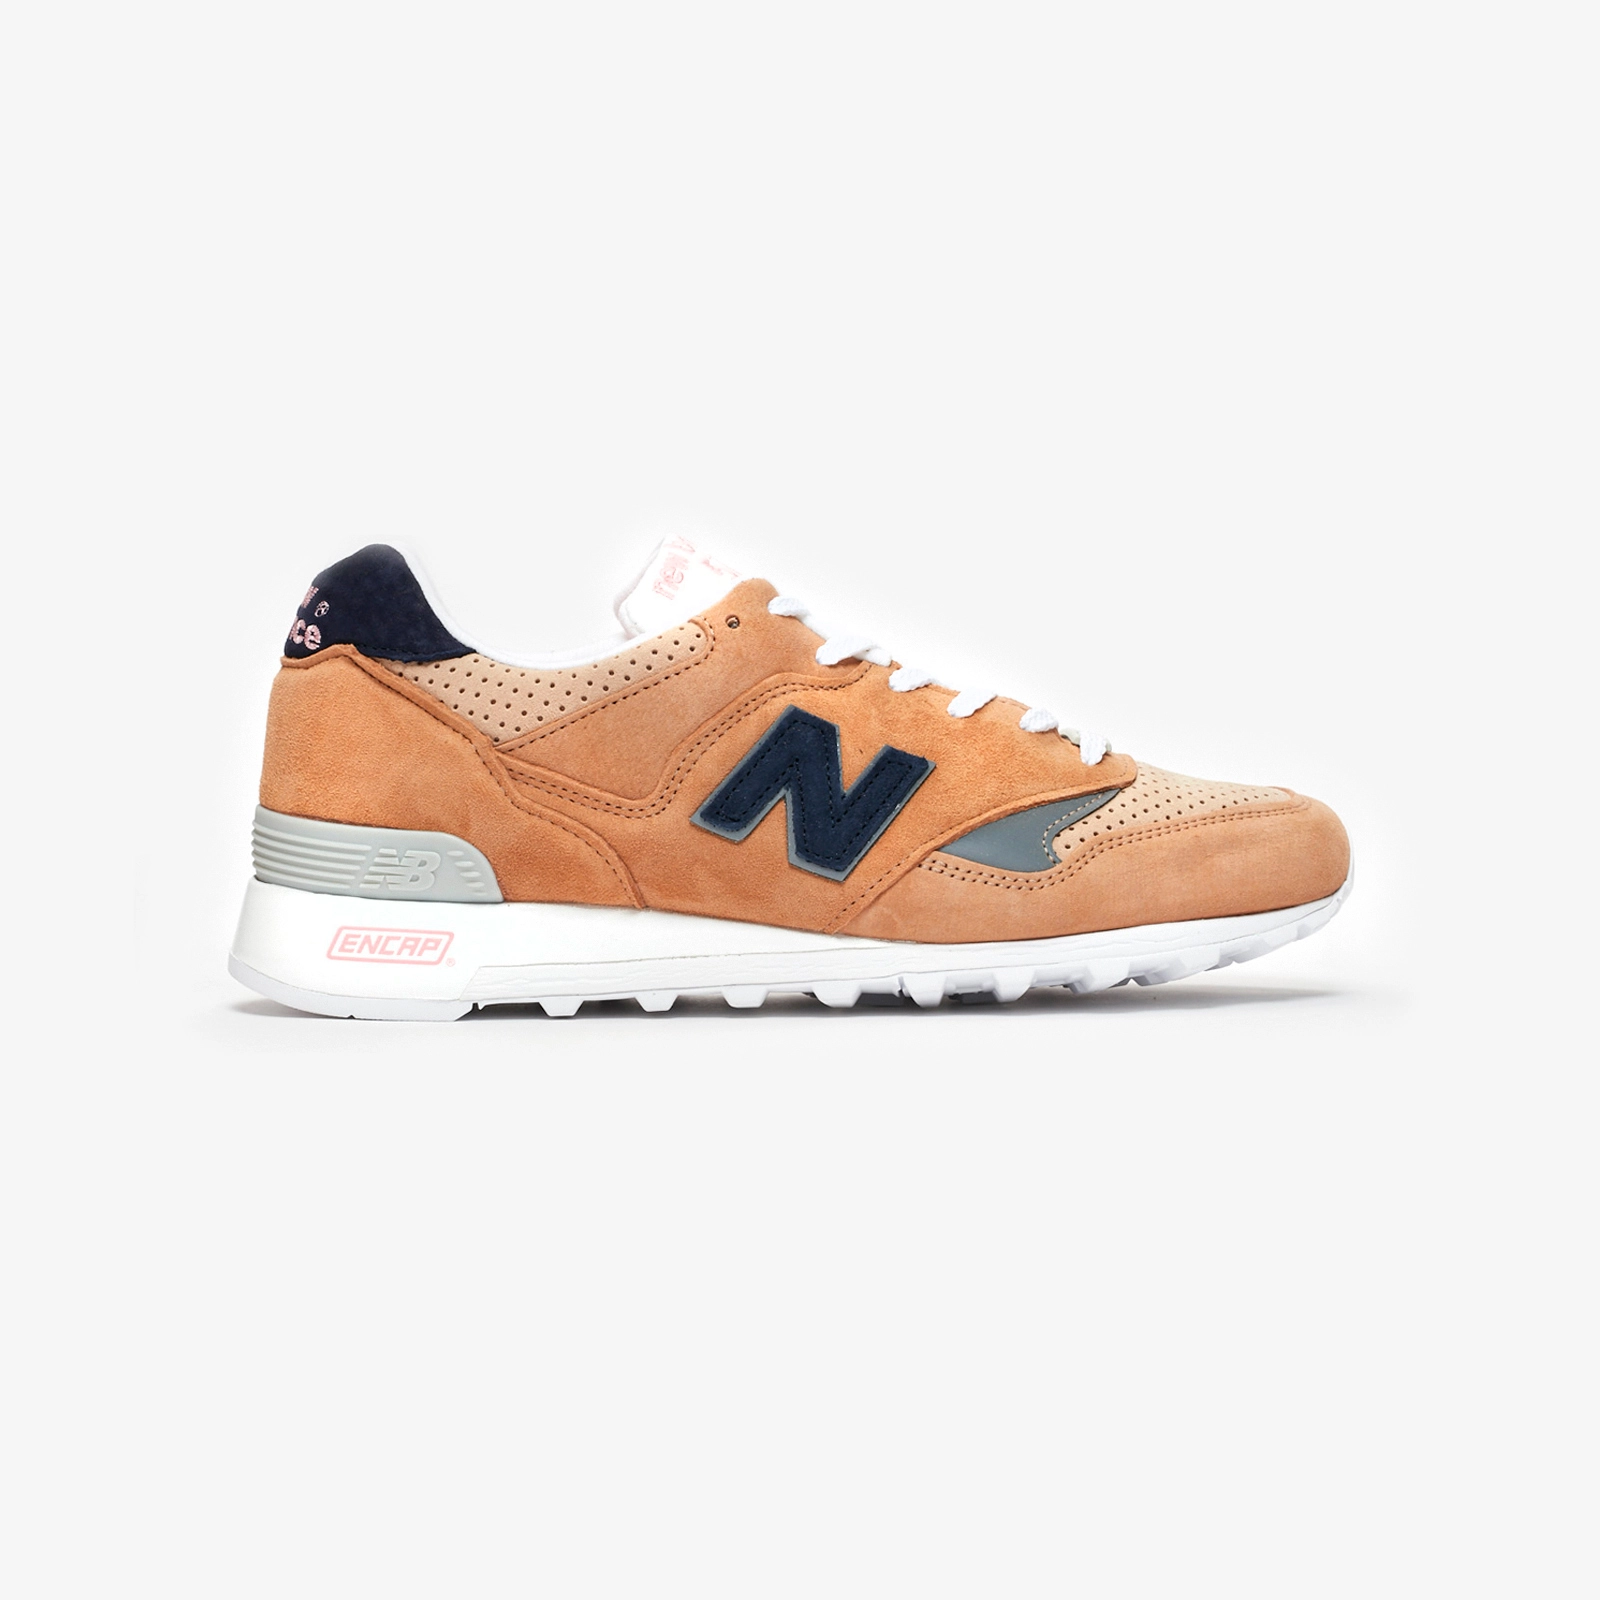 New Balance 577SKS Collaboration With Sneakersnstuff | RESPECT.